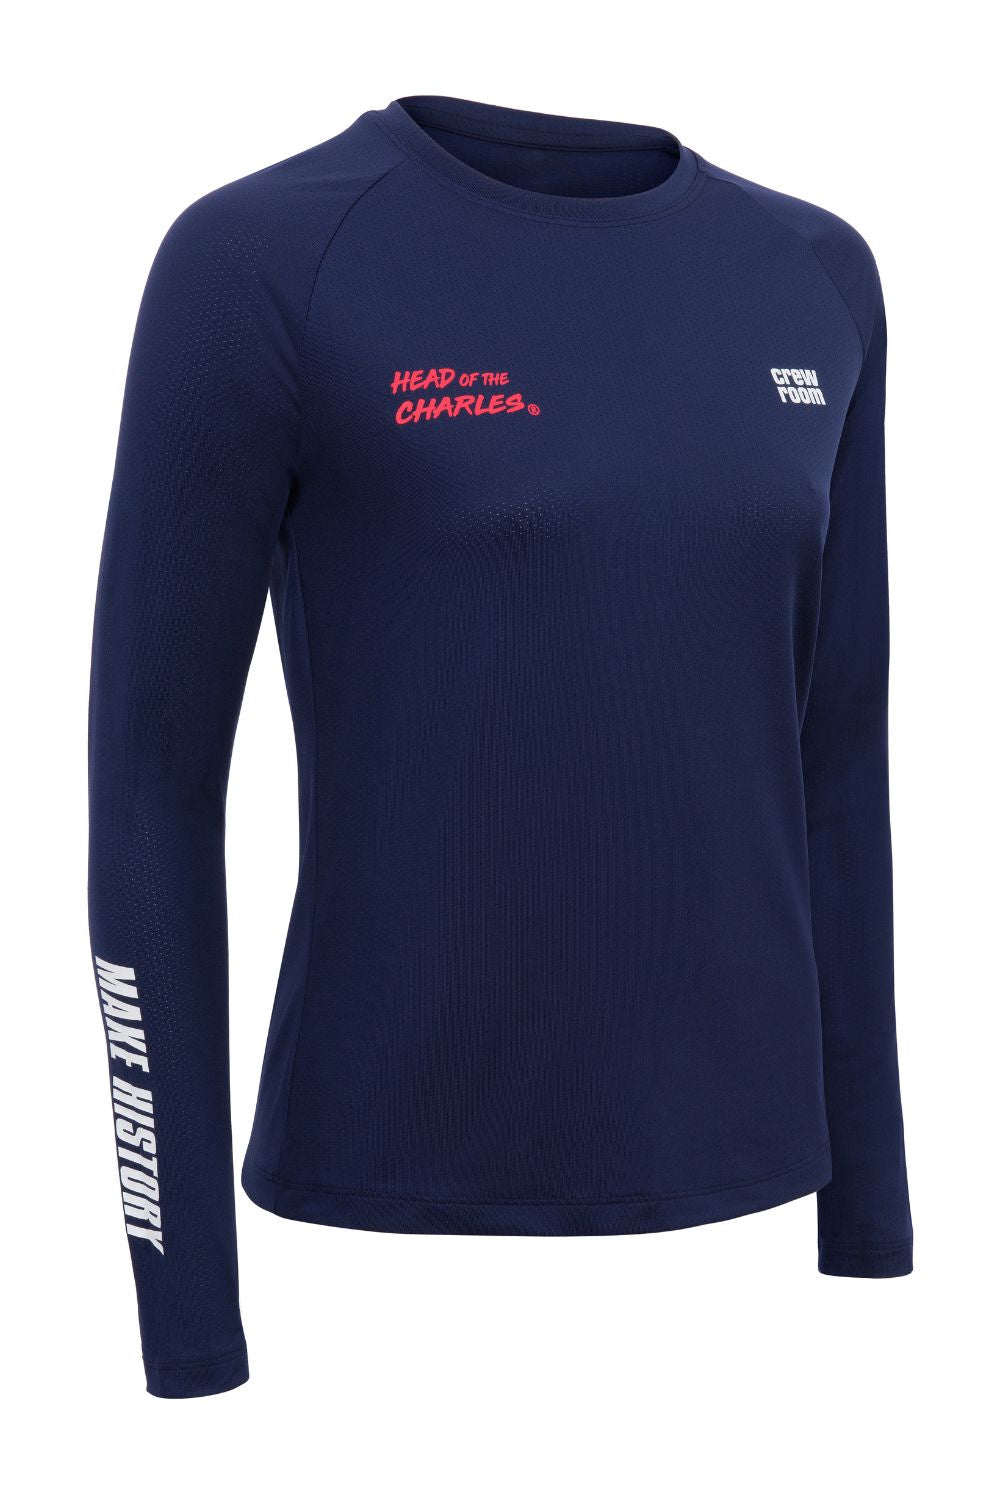 The HOCR Carbonised Bamboo Top (Women's)